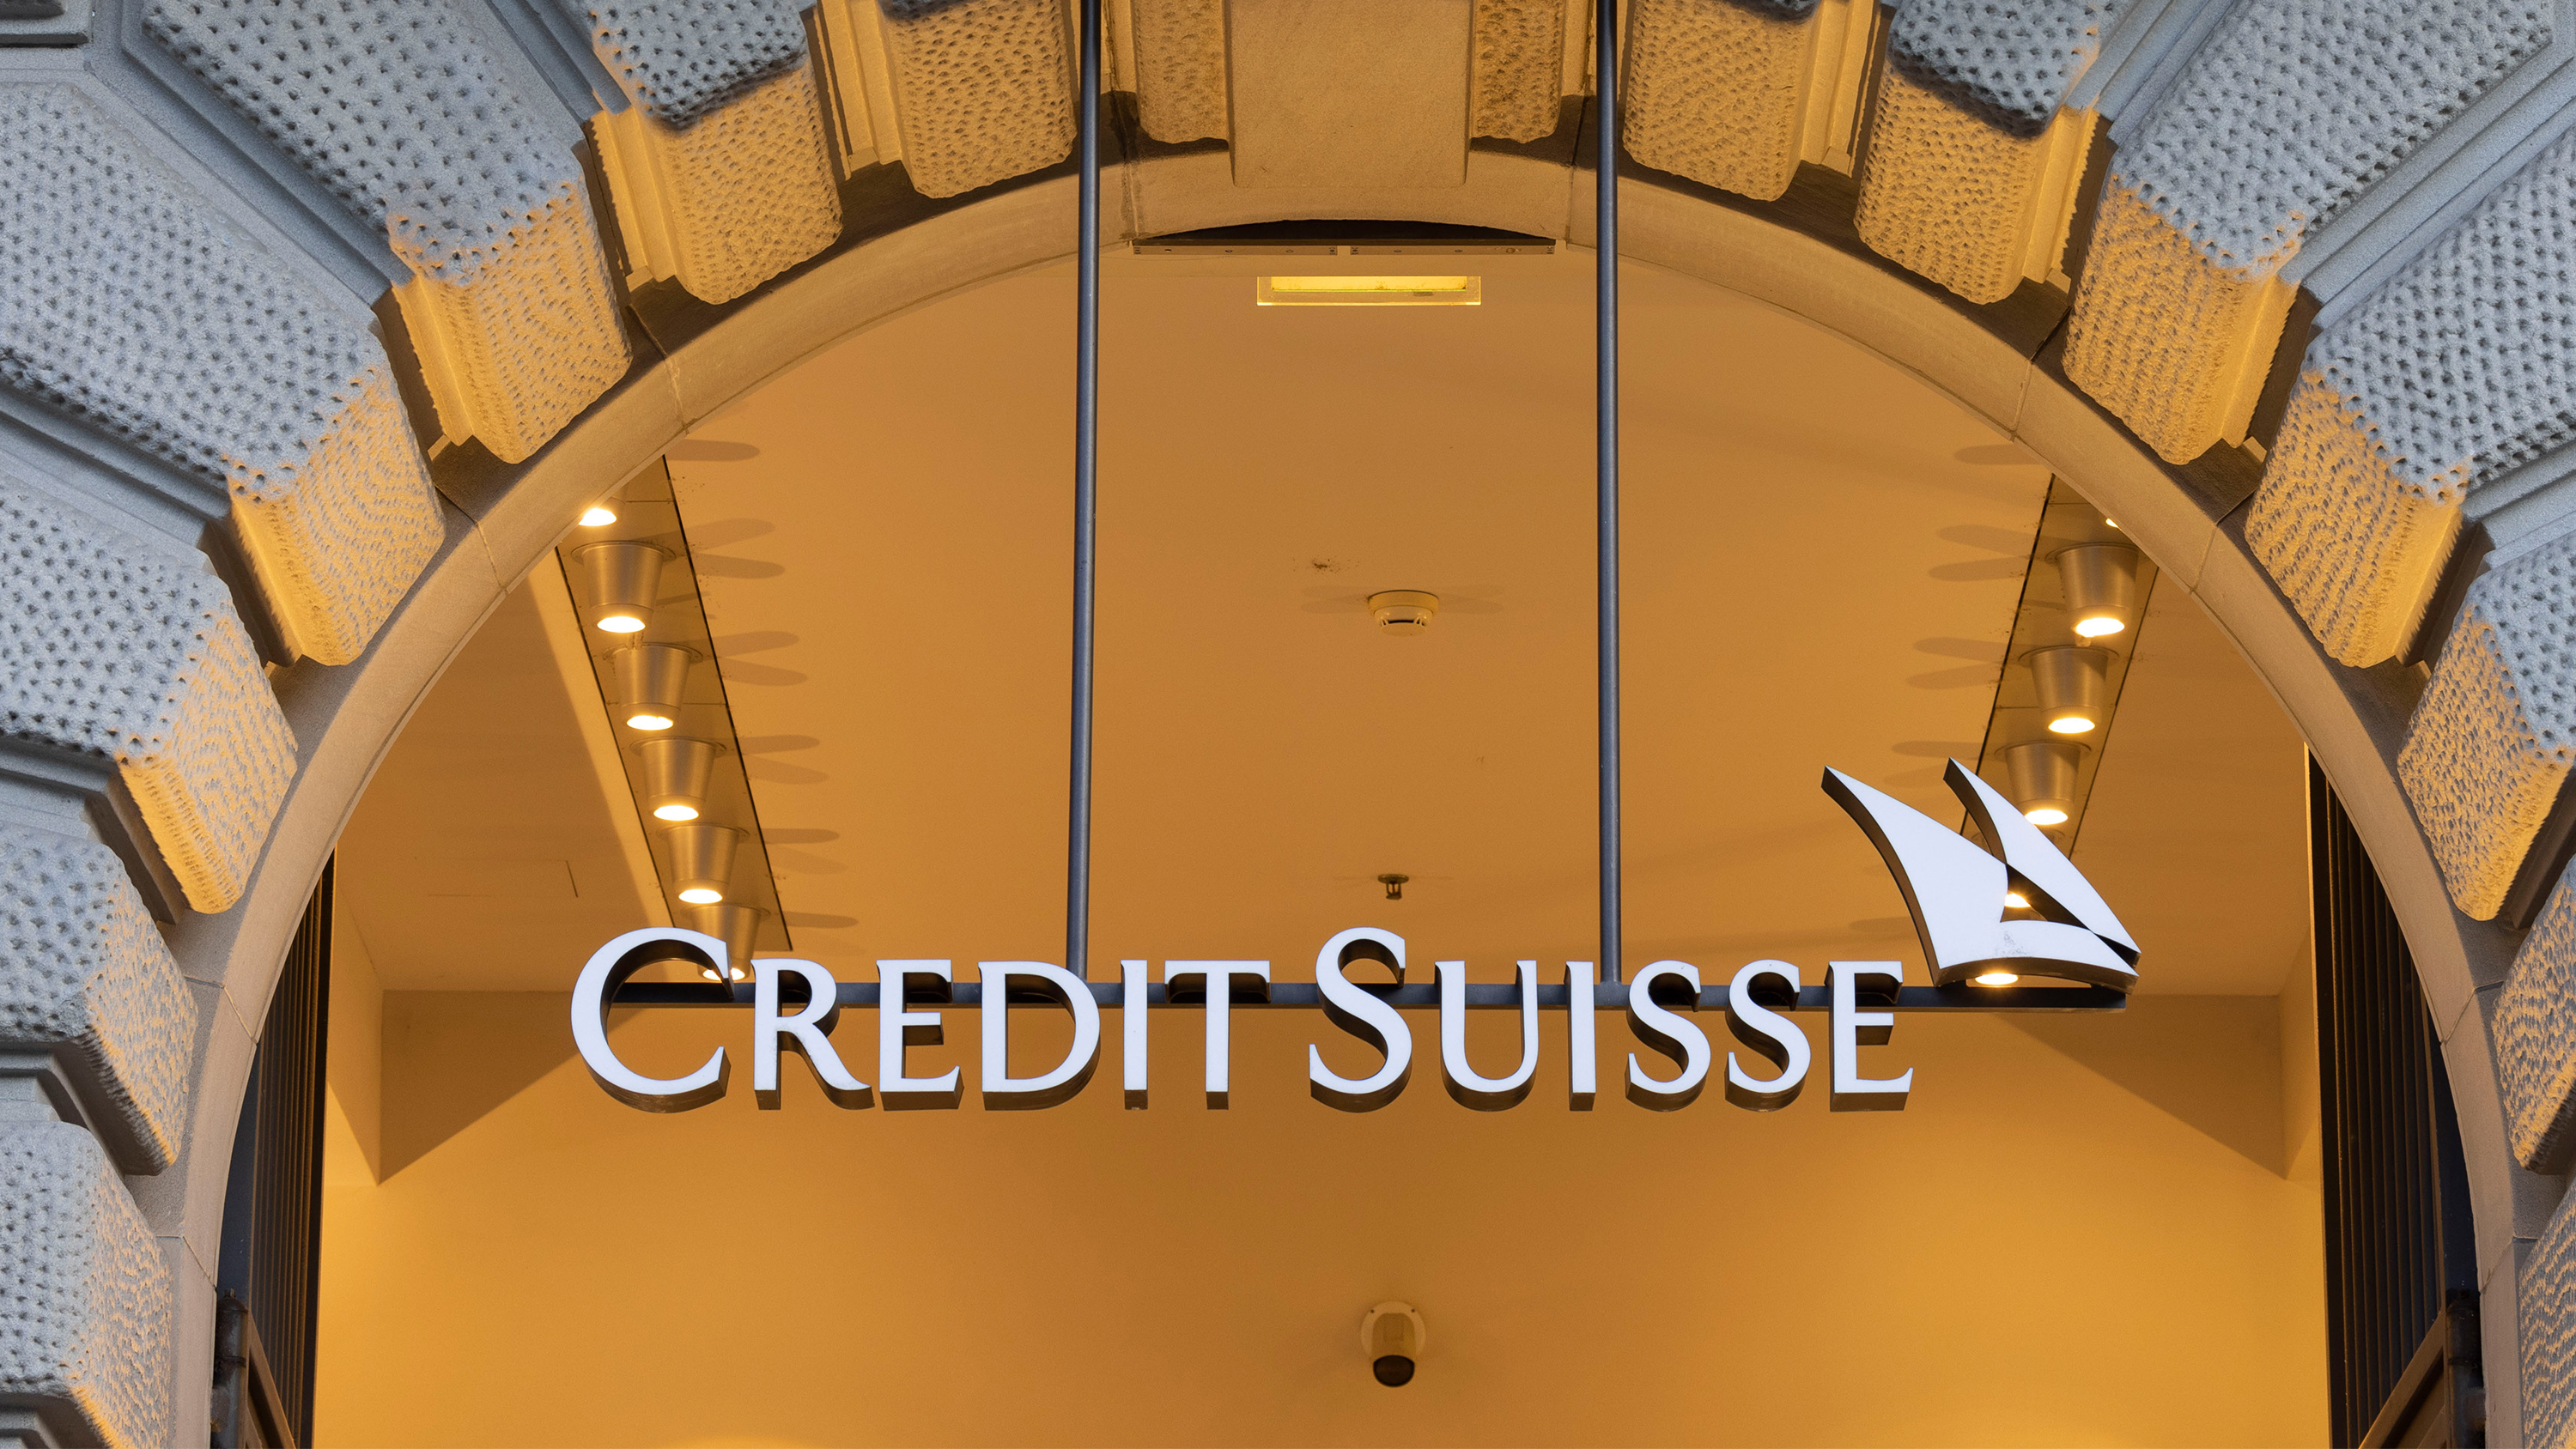 The Credit Suisse logo hanging from an archway.